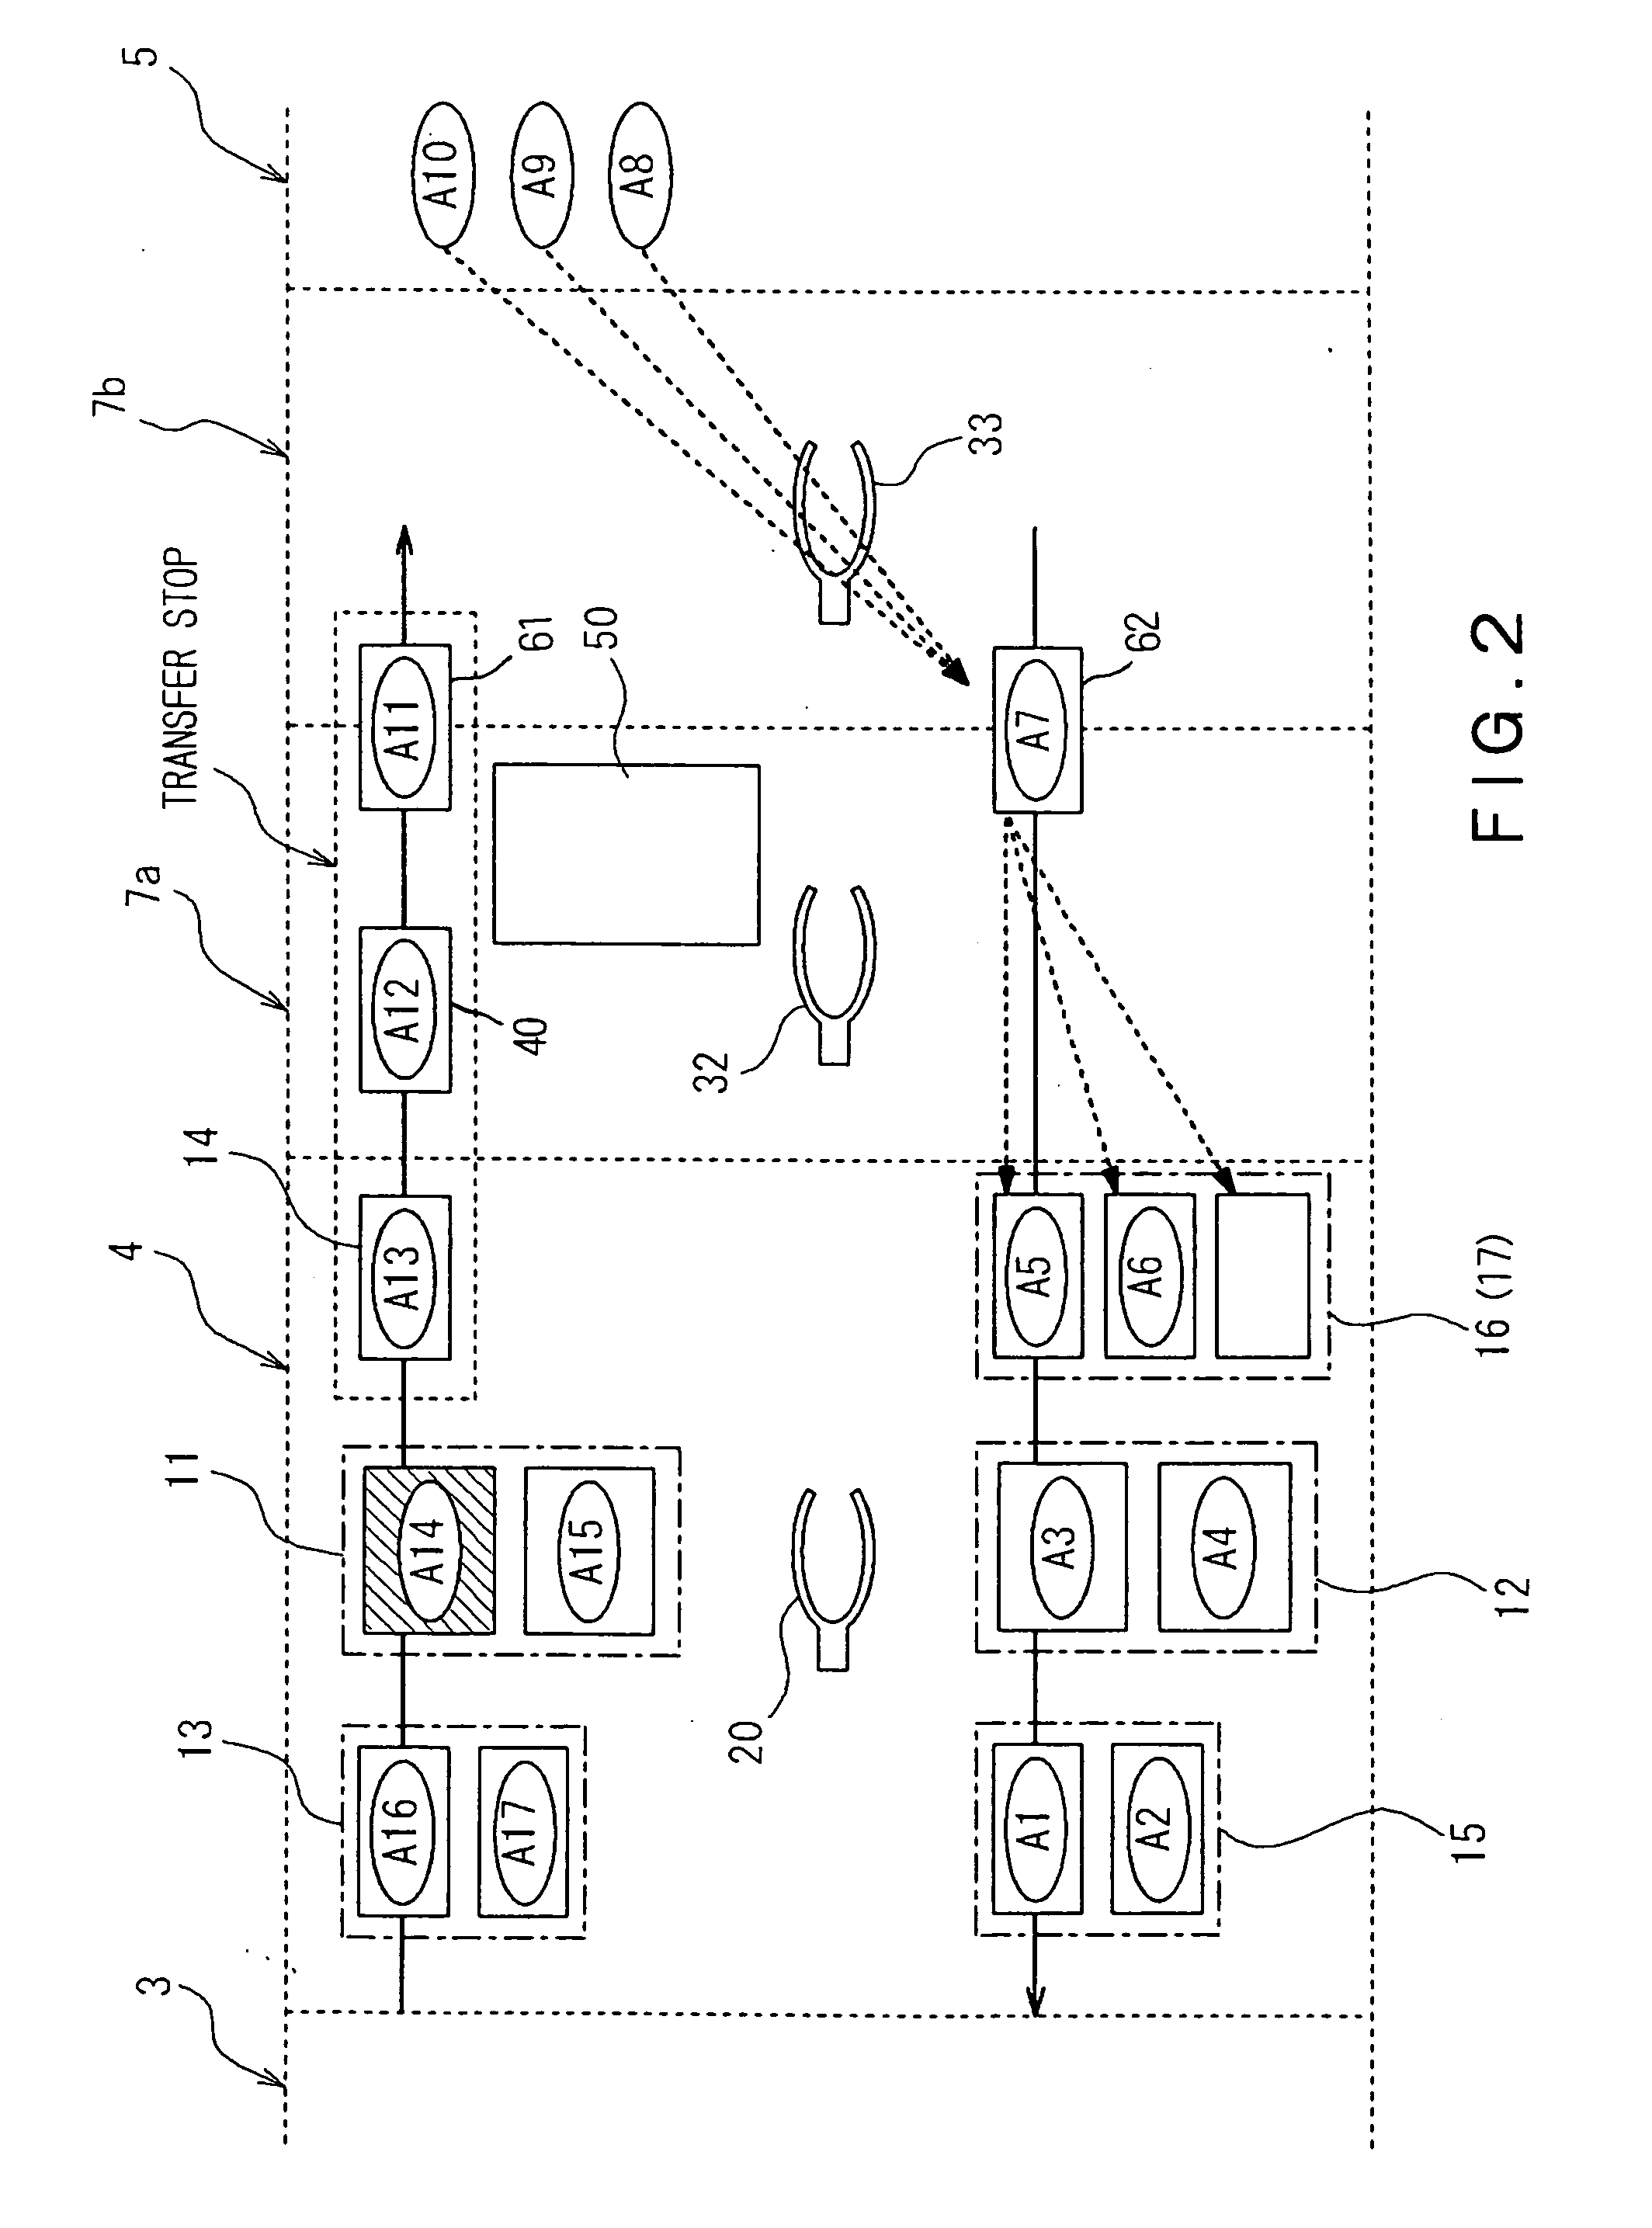 Substrate transporting and processing apparatus, fault management method for substrate transport and processing apparatus, and storage medium storing fault management program